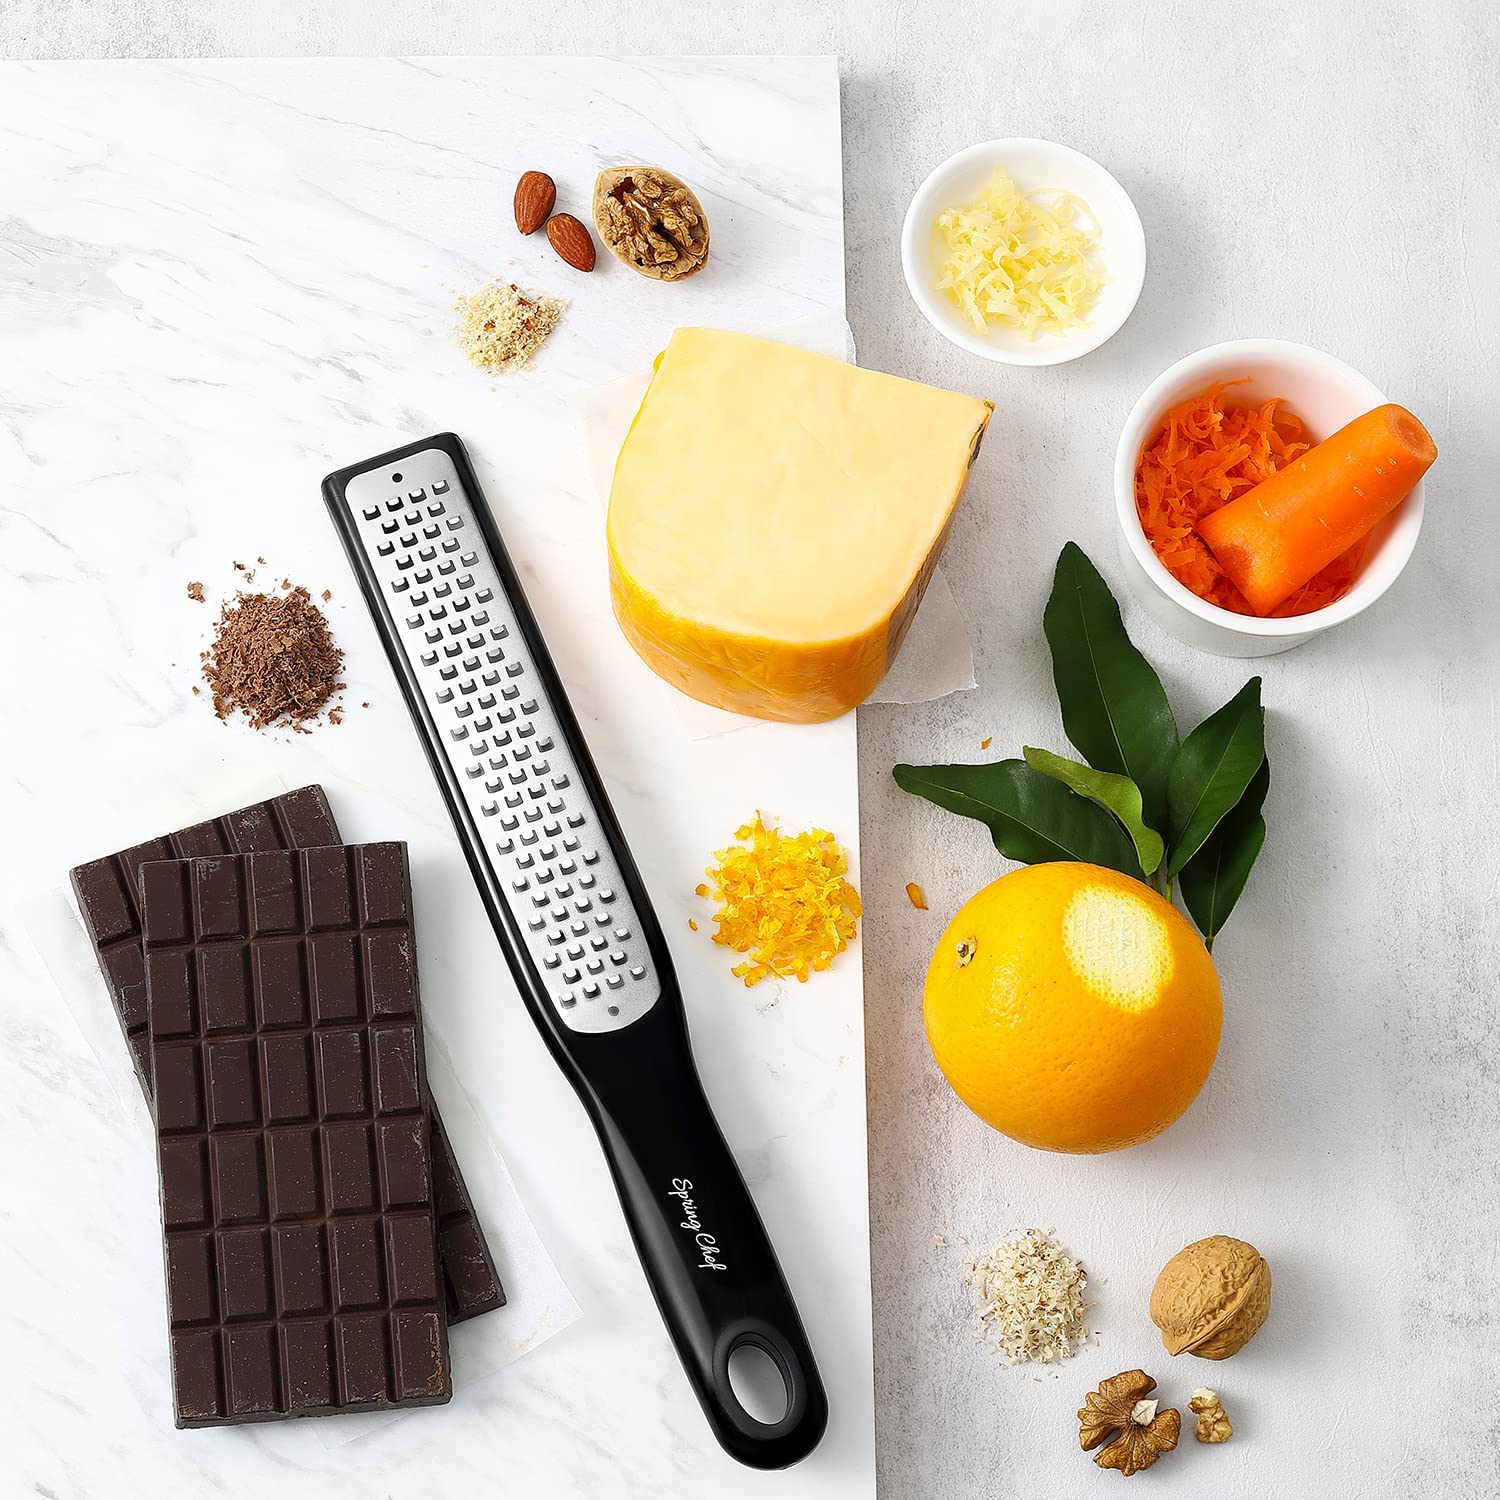 Stainless Steel Cheese Grater, Lemon, Citrus and Channel Knife for Kitchen, Ginger, Garlic, Nutmeg, Chocolate, Vegetables, Fruits, Non-Slip Handle